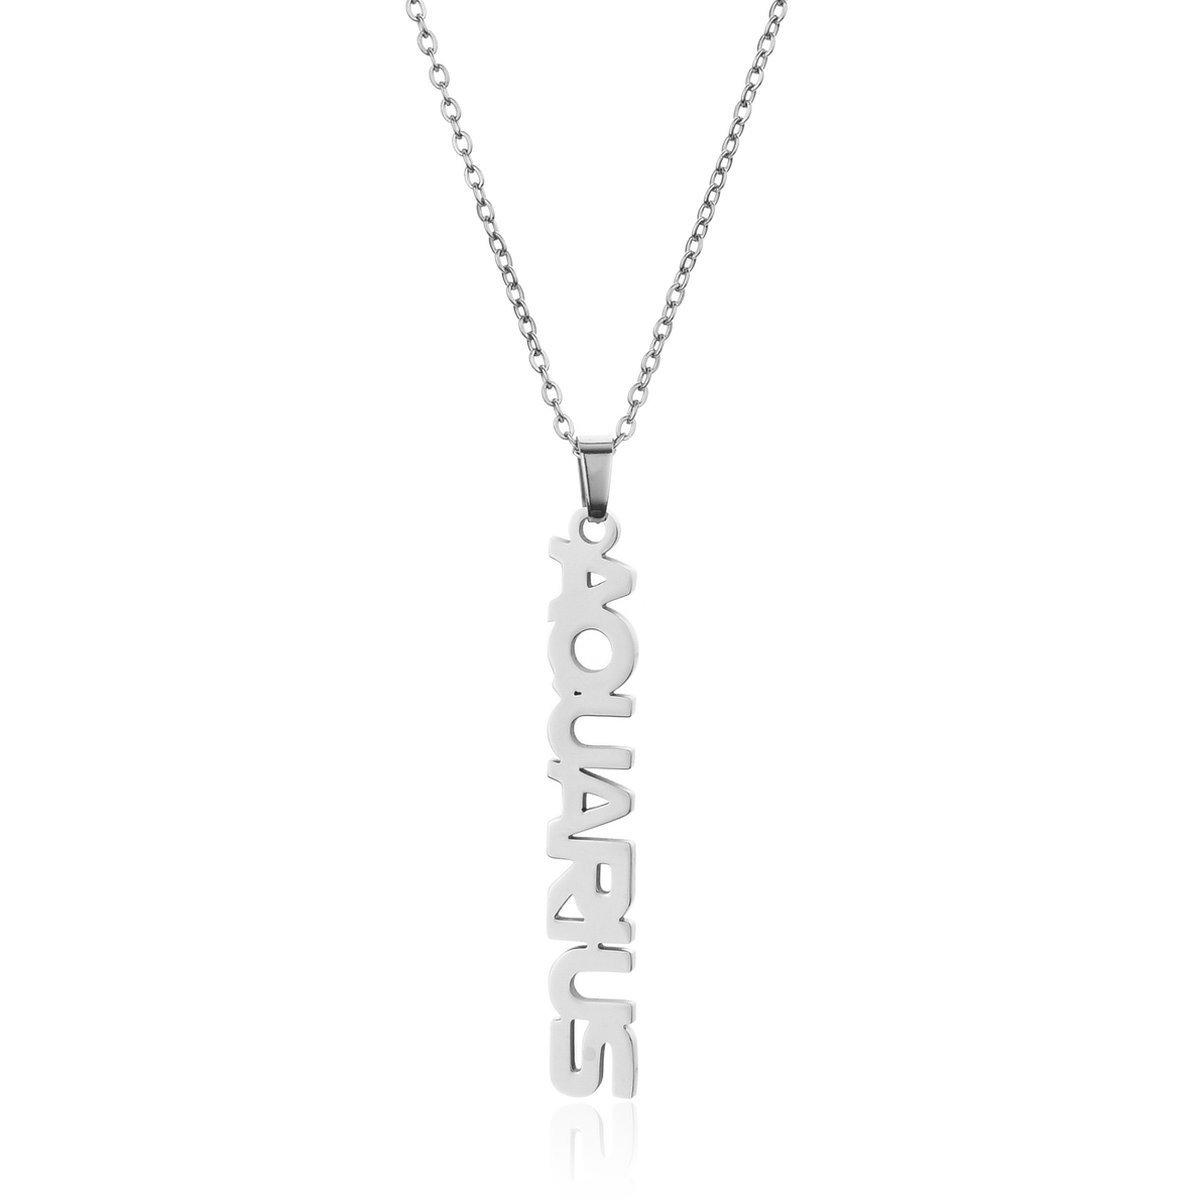 ICYBOY 18K Roestvrije Stalen Ketting Met Zodiac Sterrenbeeld Letters Pendant [Waterman] [45 cm] Silver Plating Stainless Steel Letter Necklace Vertical Horoscope Necklace